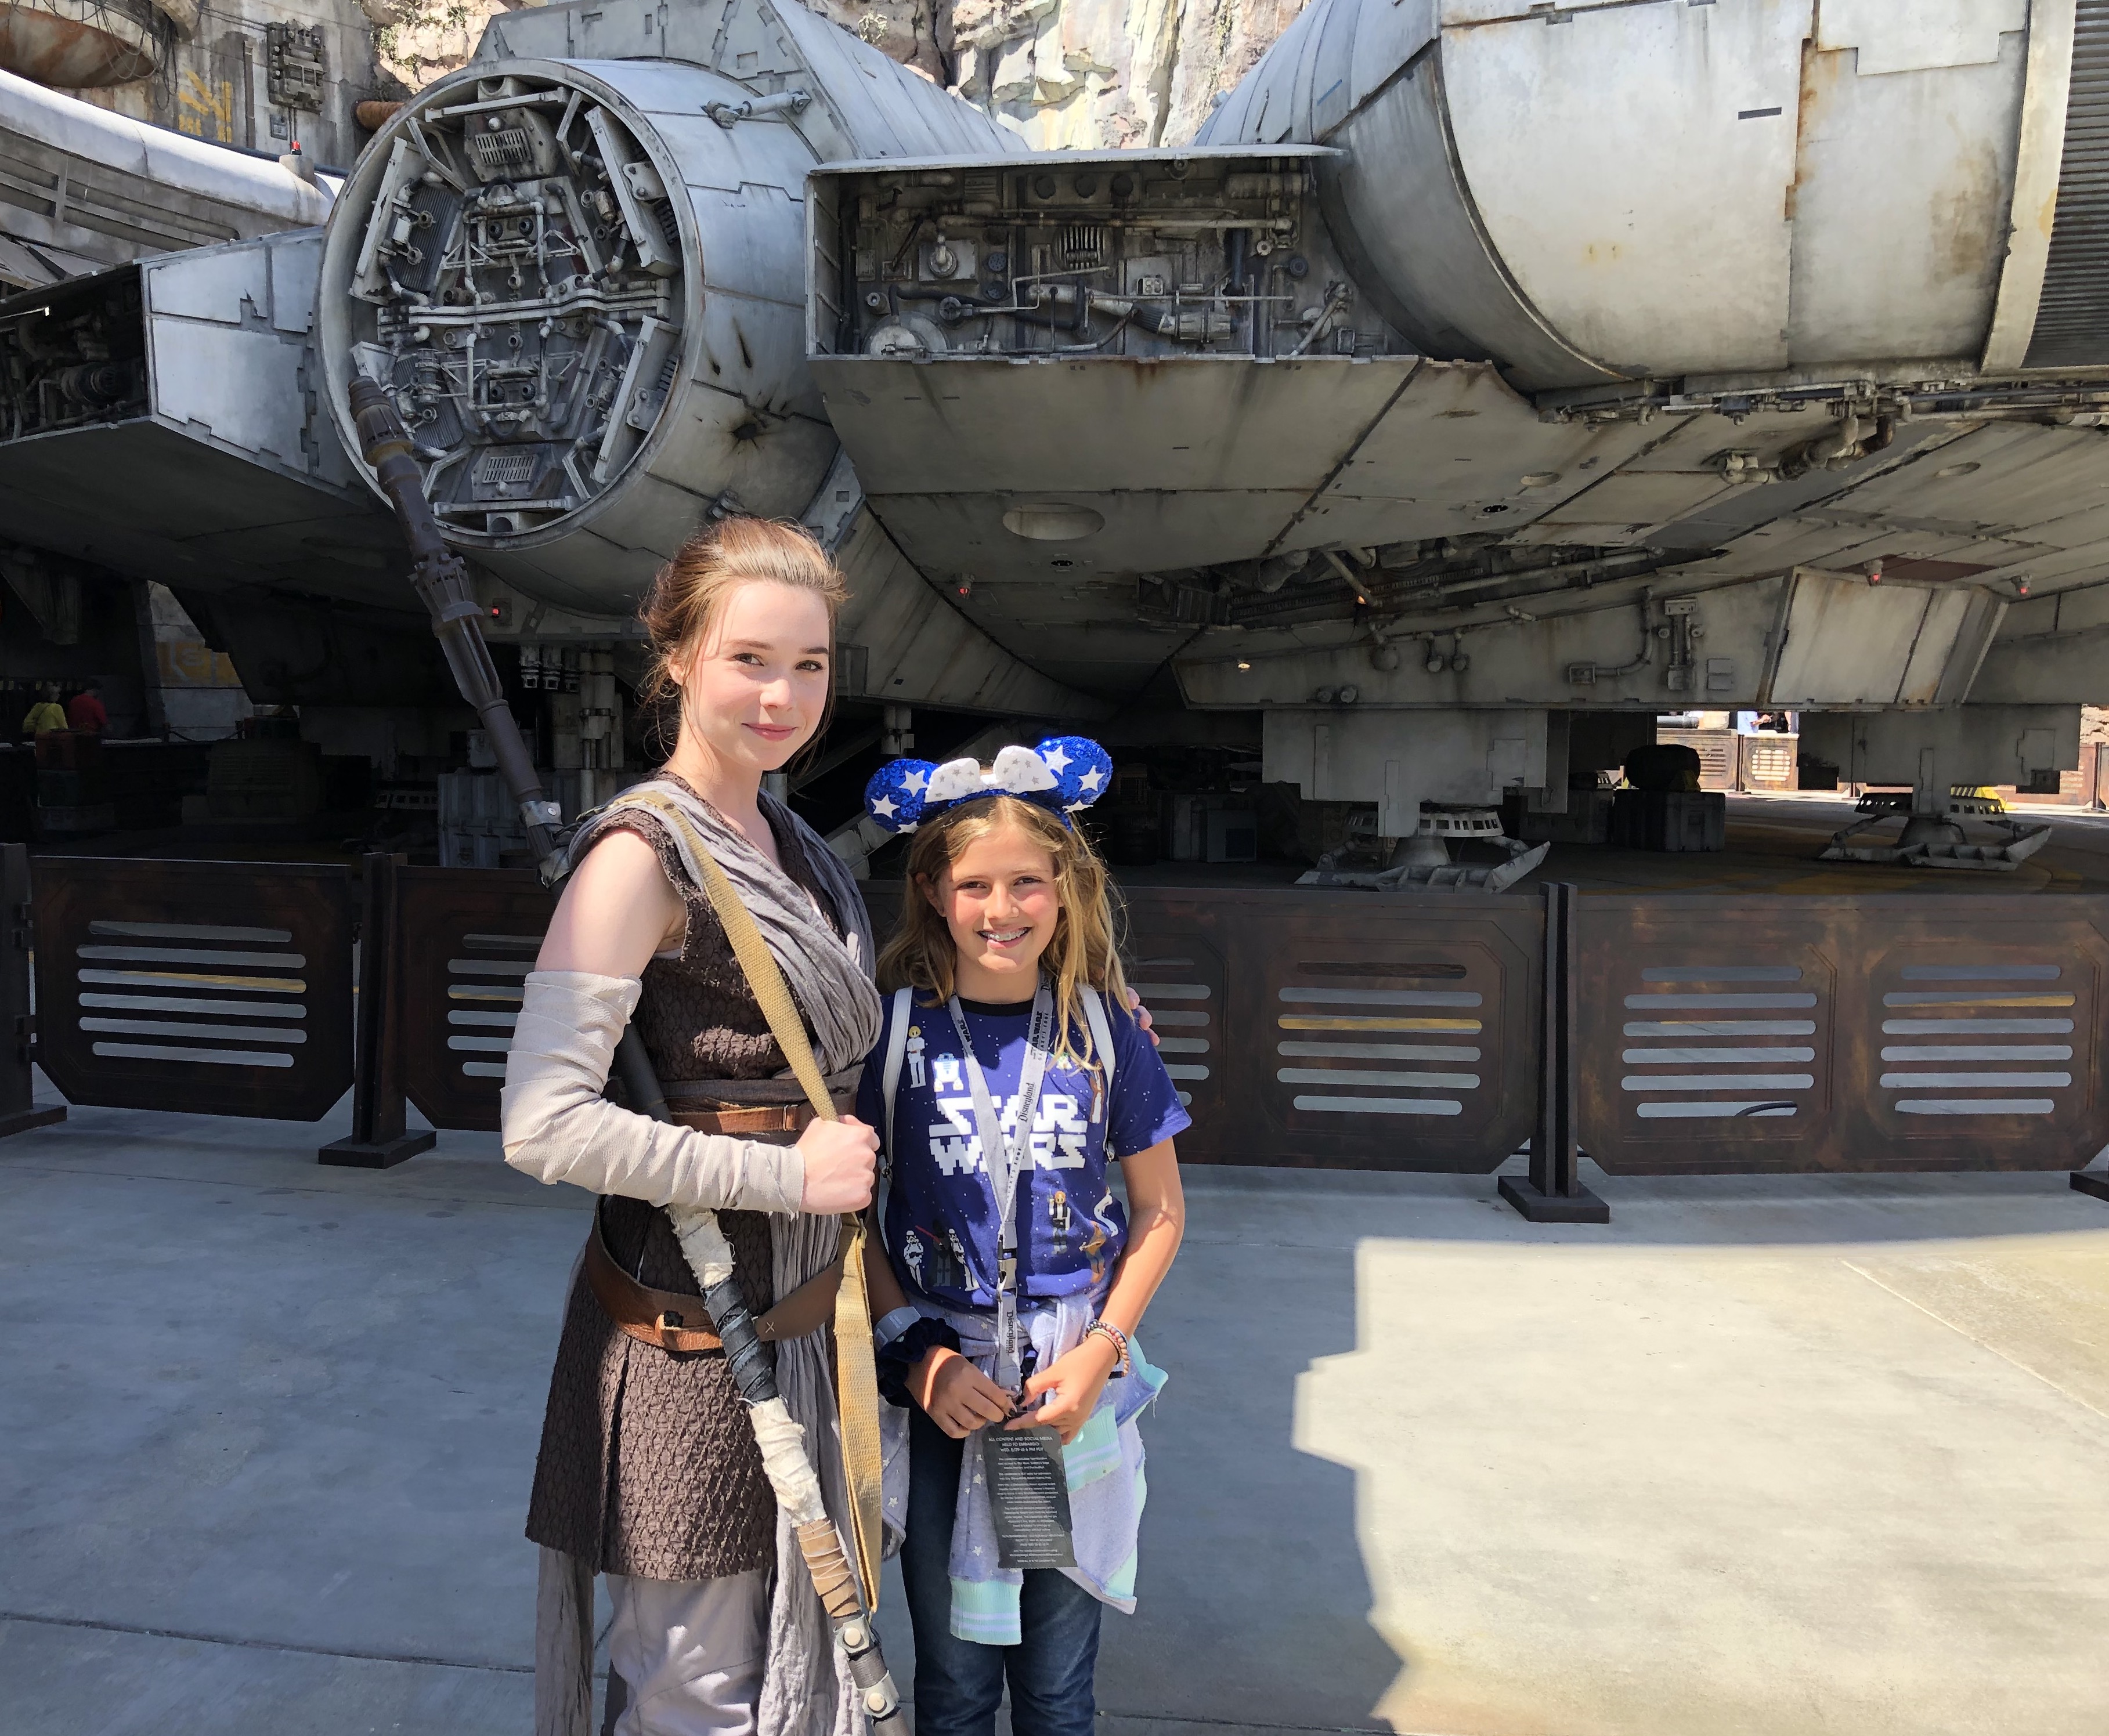 Gear Up For Galaxy's Edge In Black Milk Clothing's I Am The